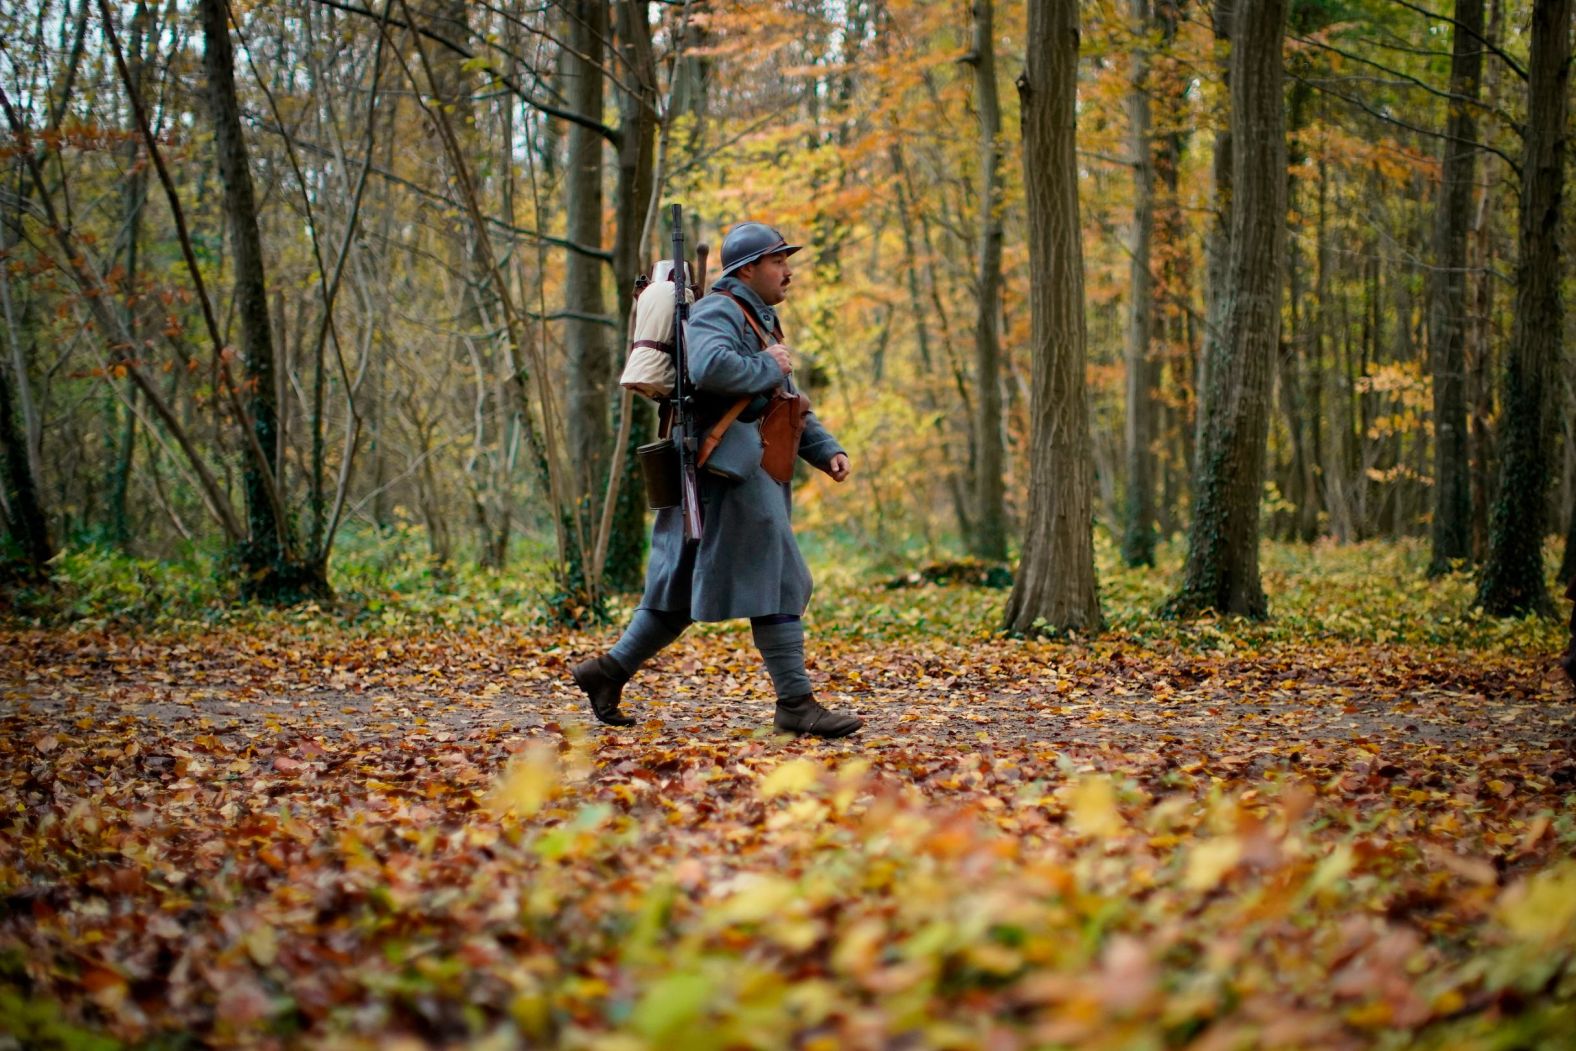 A historical re-enactor walks through the forest to the clearing of Rethondes to pay respects Sunday in Compiegne, France. The armistice ending the First World War between the Allies and Germany was signed at the clearing.